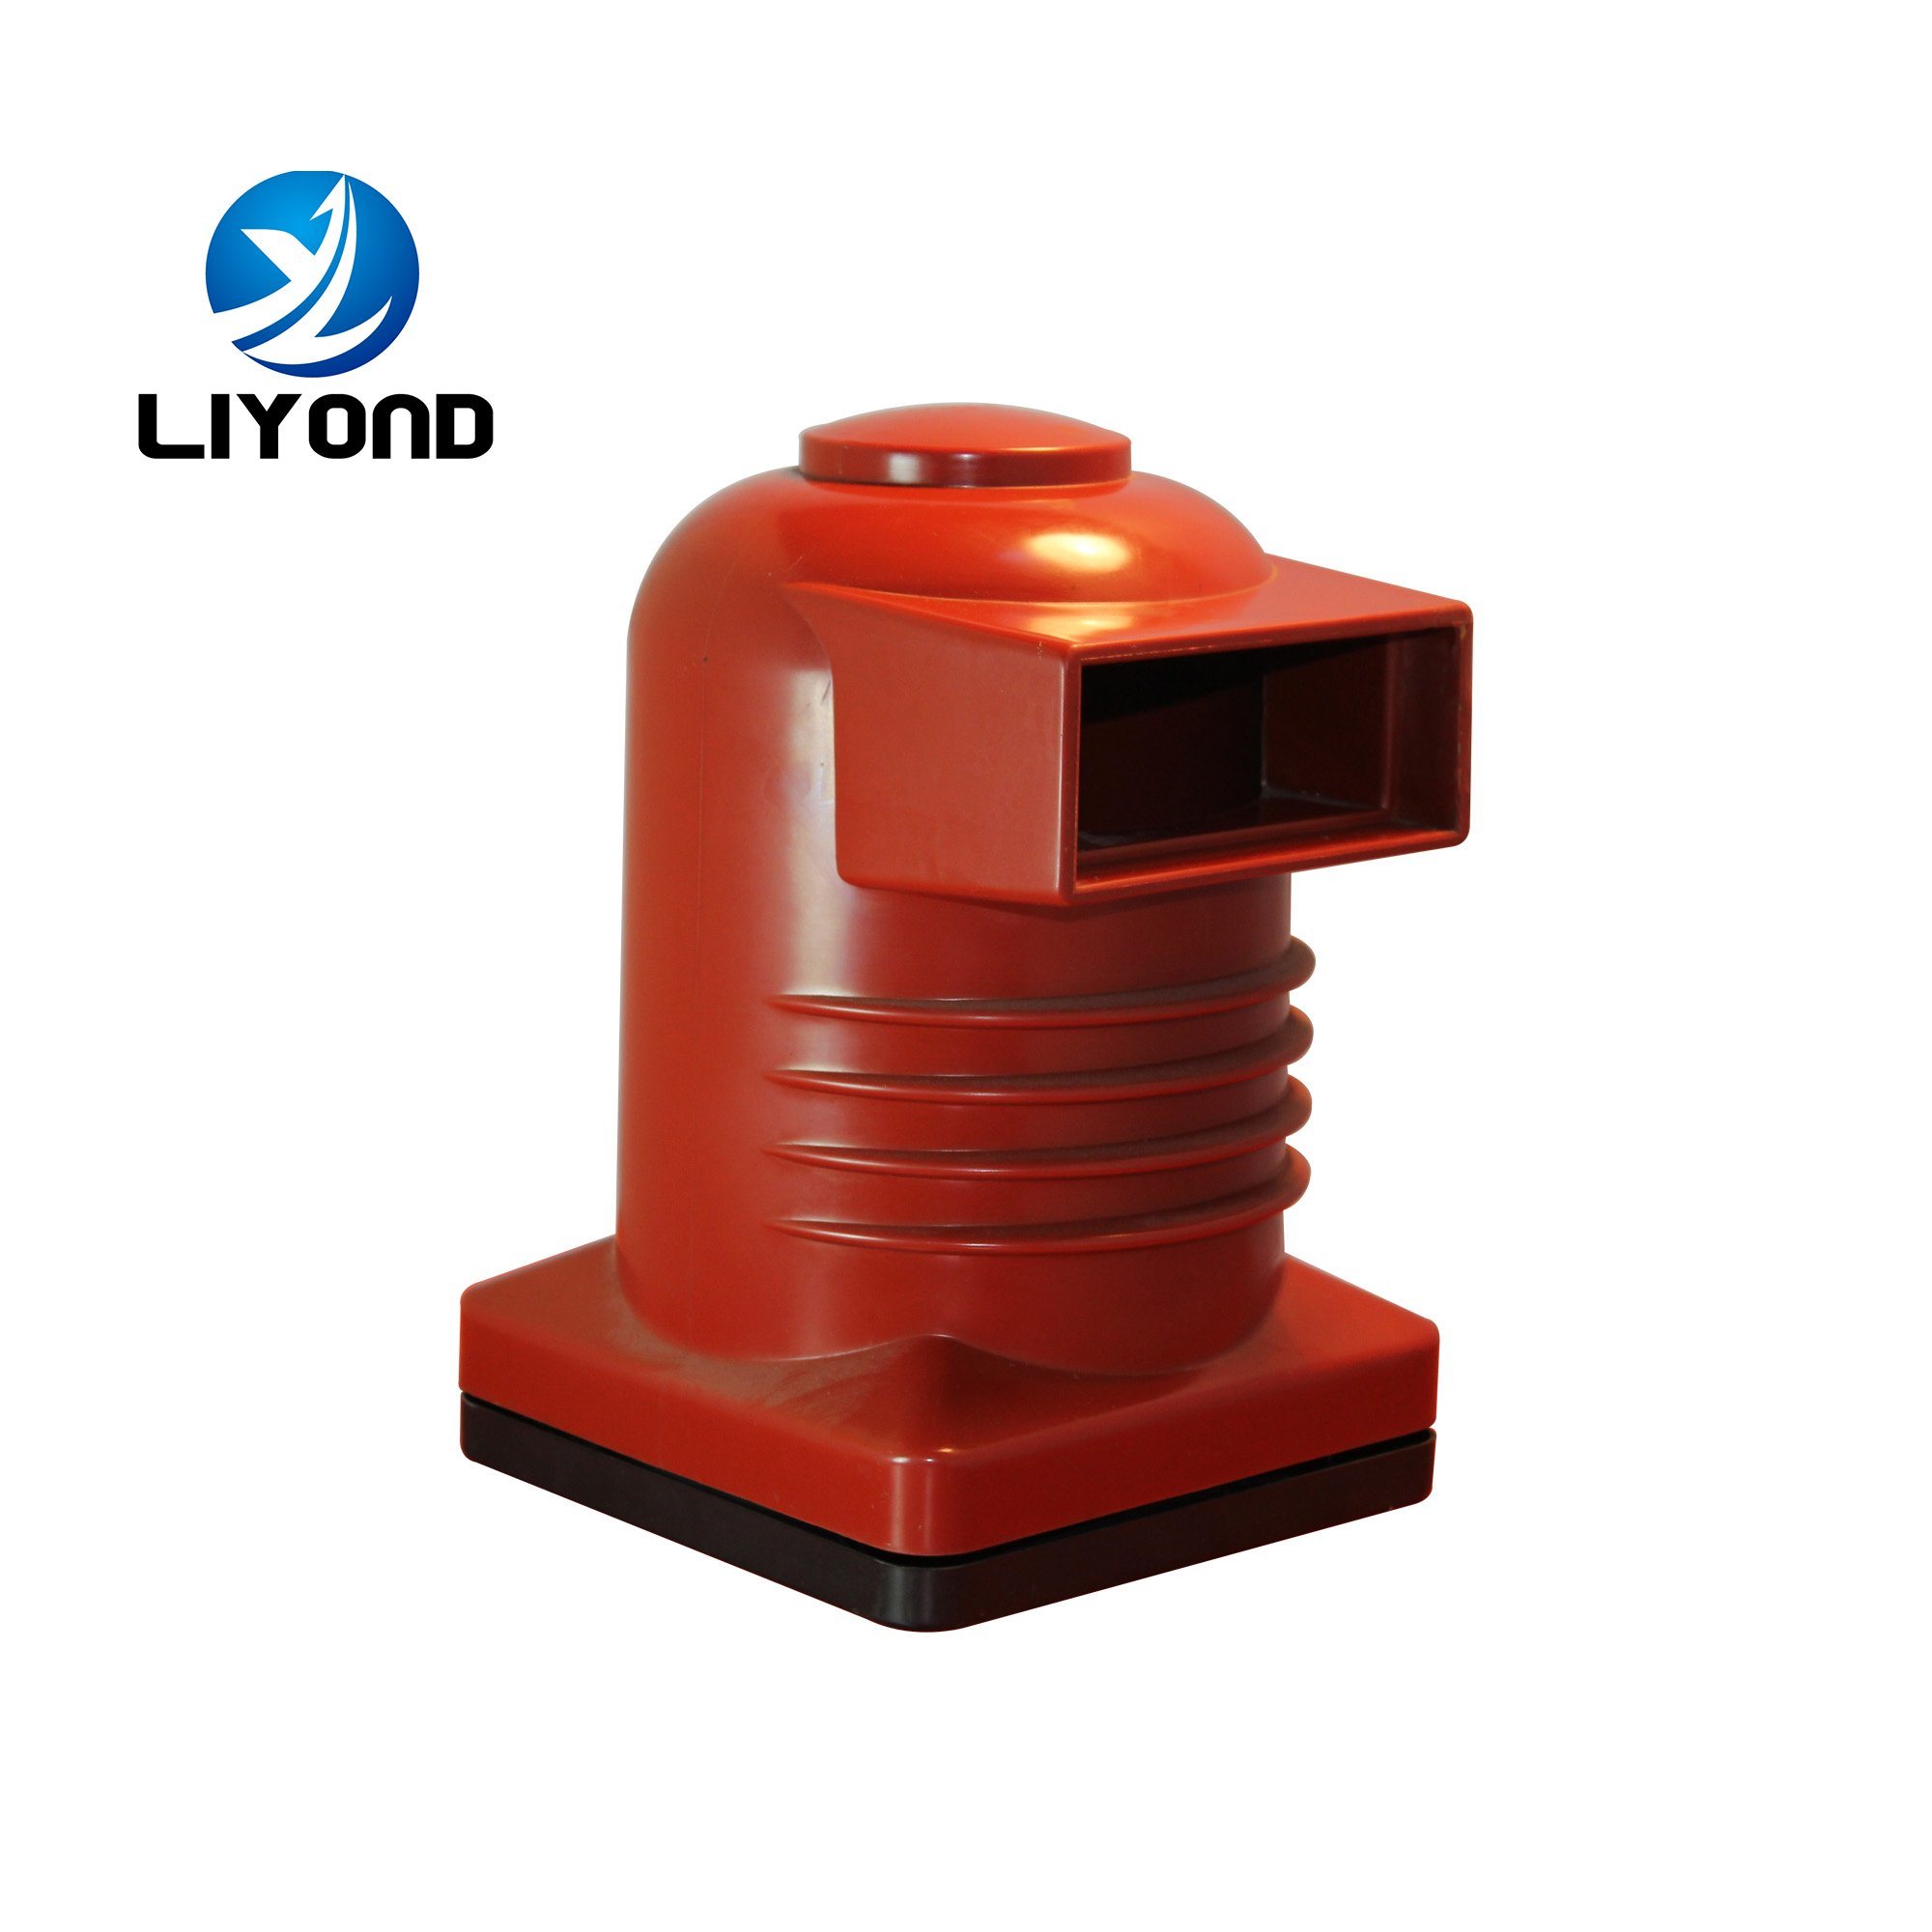 Ly104 12kv 1600-2000A Medium Voltage Epoxy Resin Contact Box Insulator for Indoor Hv Switchgear